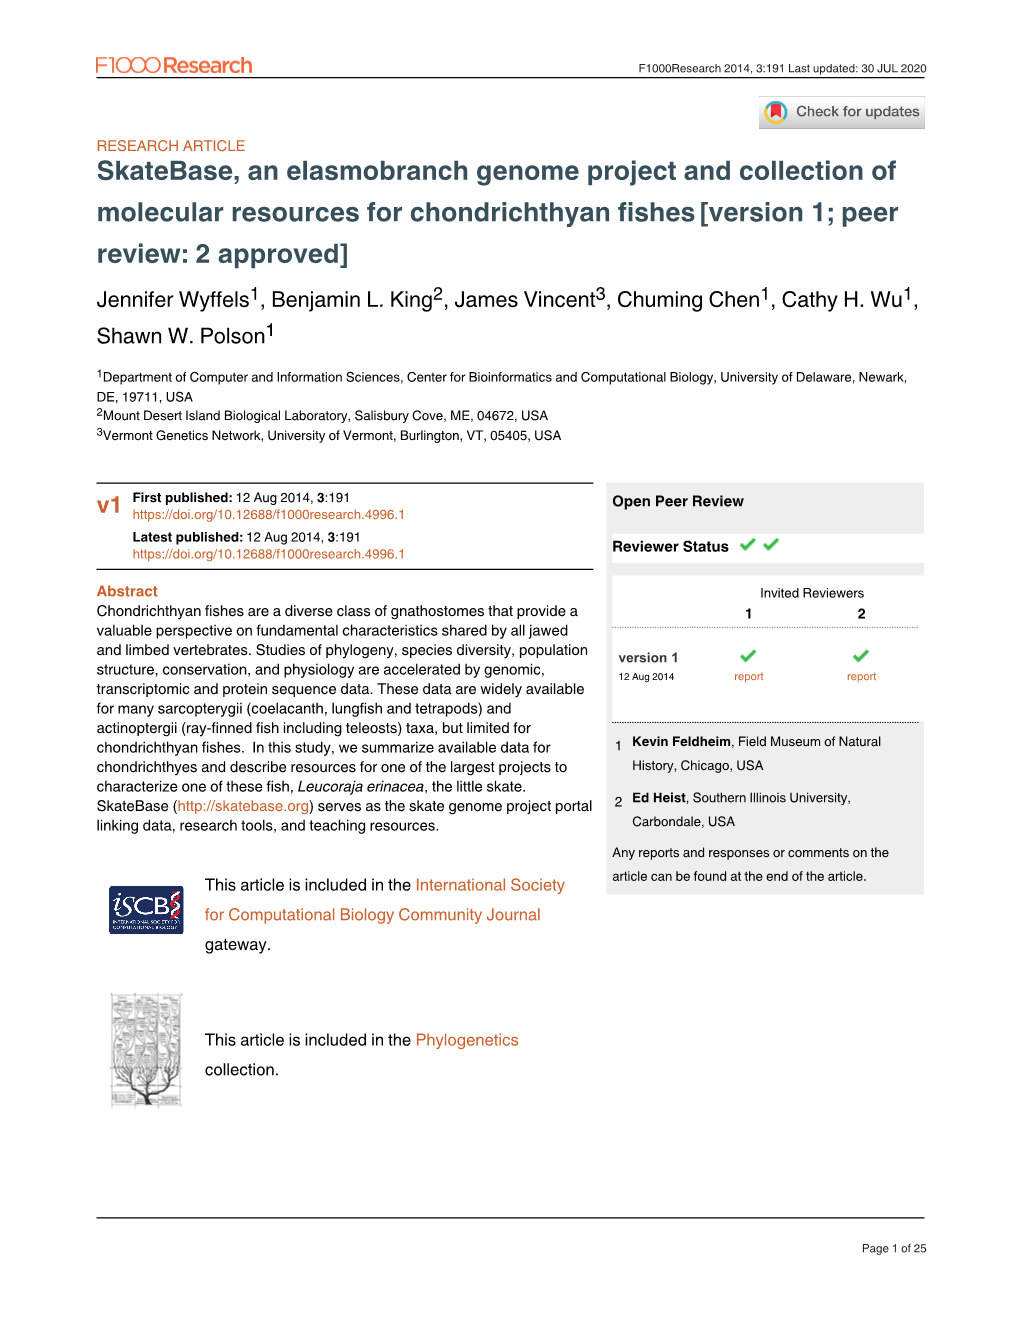 Skatebase, an Elasmobranch Genome Project and Collection of Molecular Resources for Chondrichthyan Fishes[Version 1; Peer Review